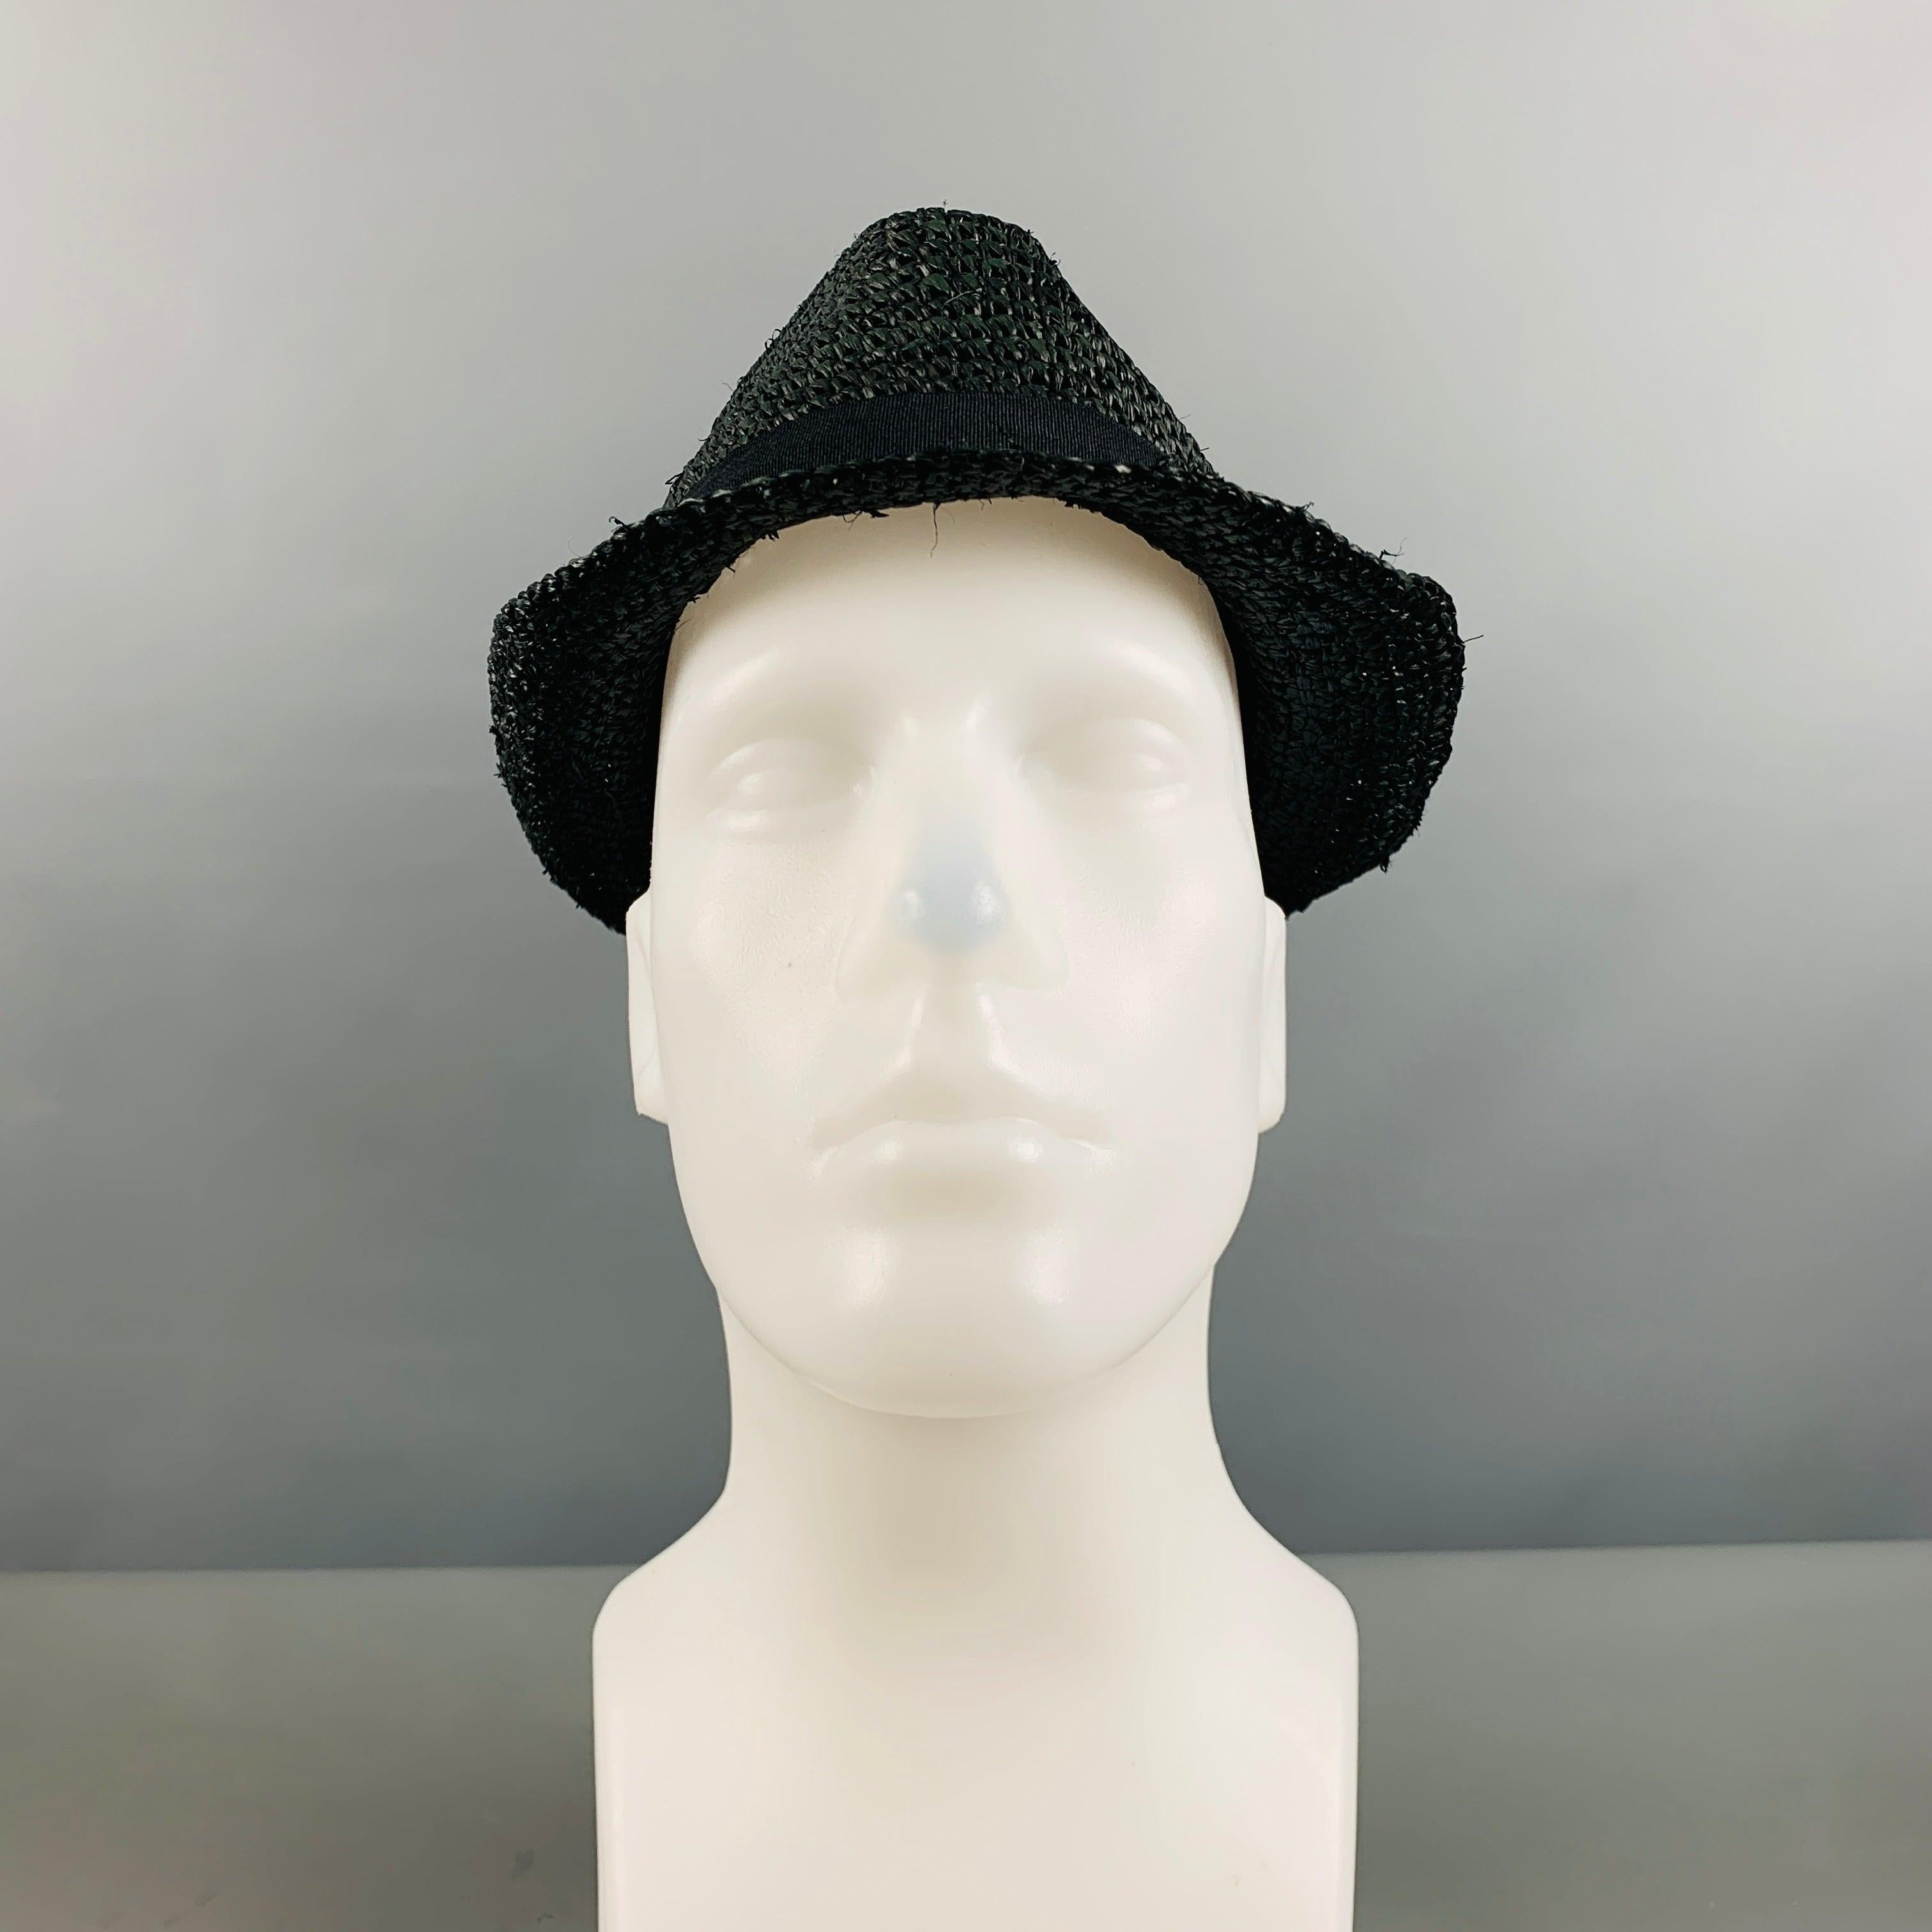 JOHN VARVATOS U.S.A hat comes in a black woven paper yarn material. Very Good Pre-Owned Condition. 

Marked:   S/M 

Measurements: 
  Opening: 22 inches Brim: 2 inches Height: 5 inches   
  
  
 
Reference No.: 129189
Category: Hats
More Details
   